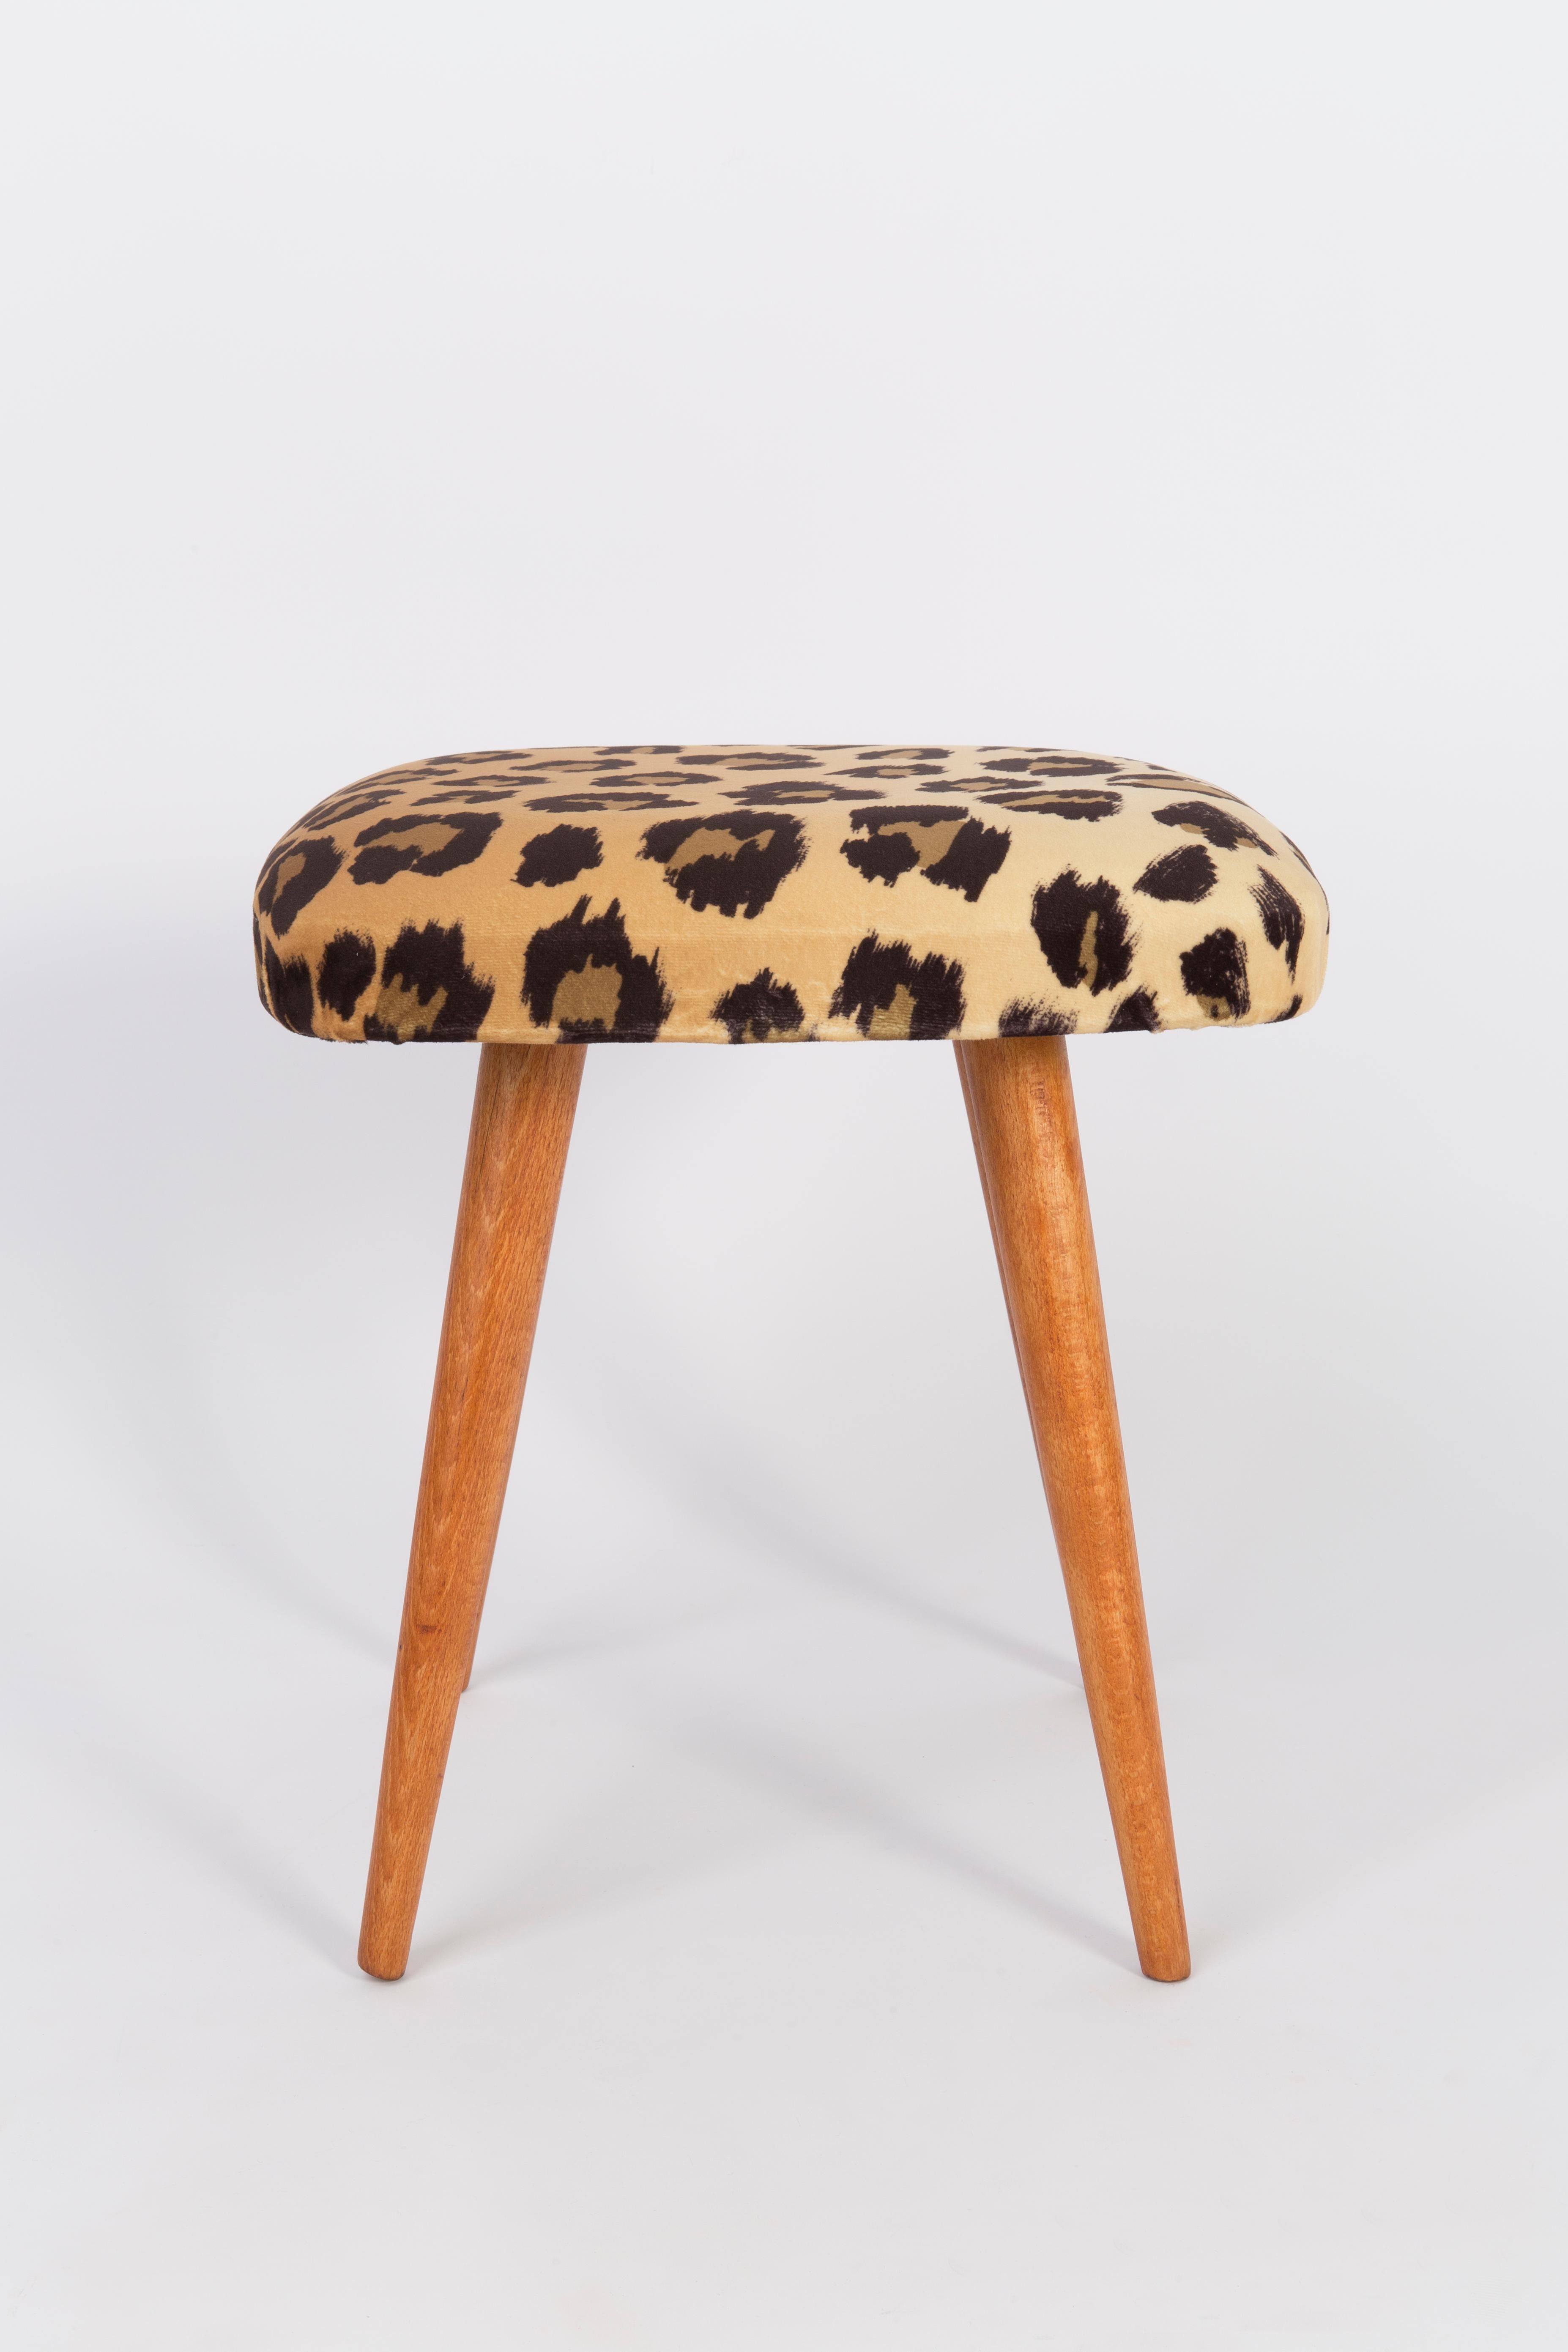 Hand-Crafted Mid Century Leopard Velvet Vintage Stool, Europe, 1960s For Sale